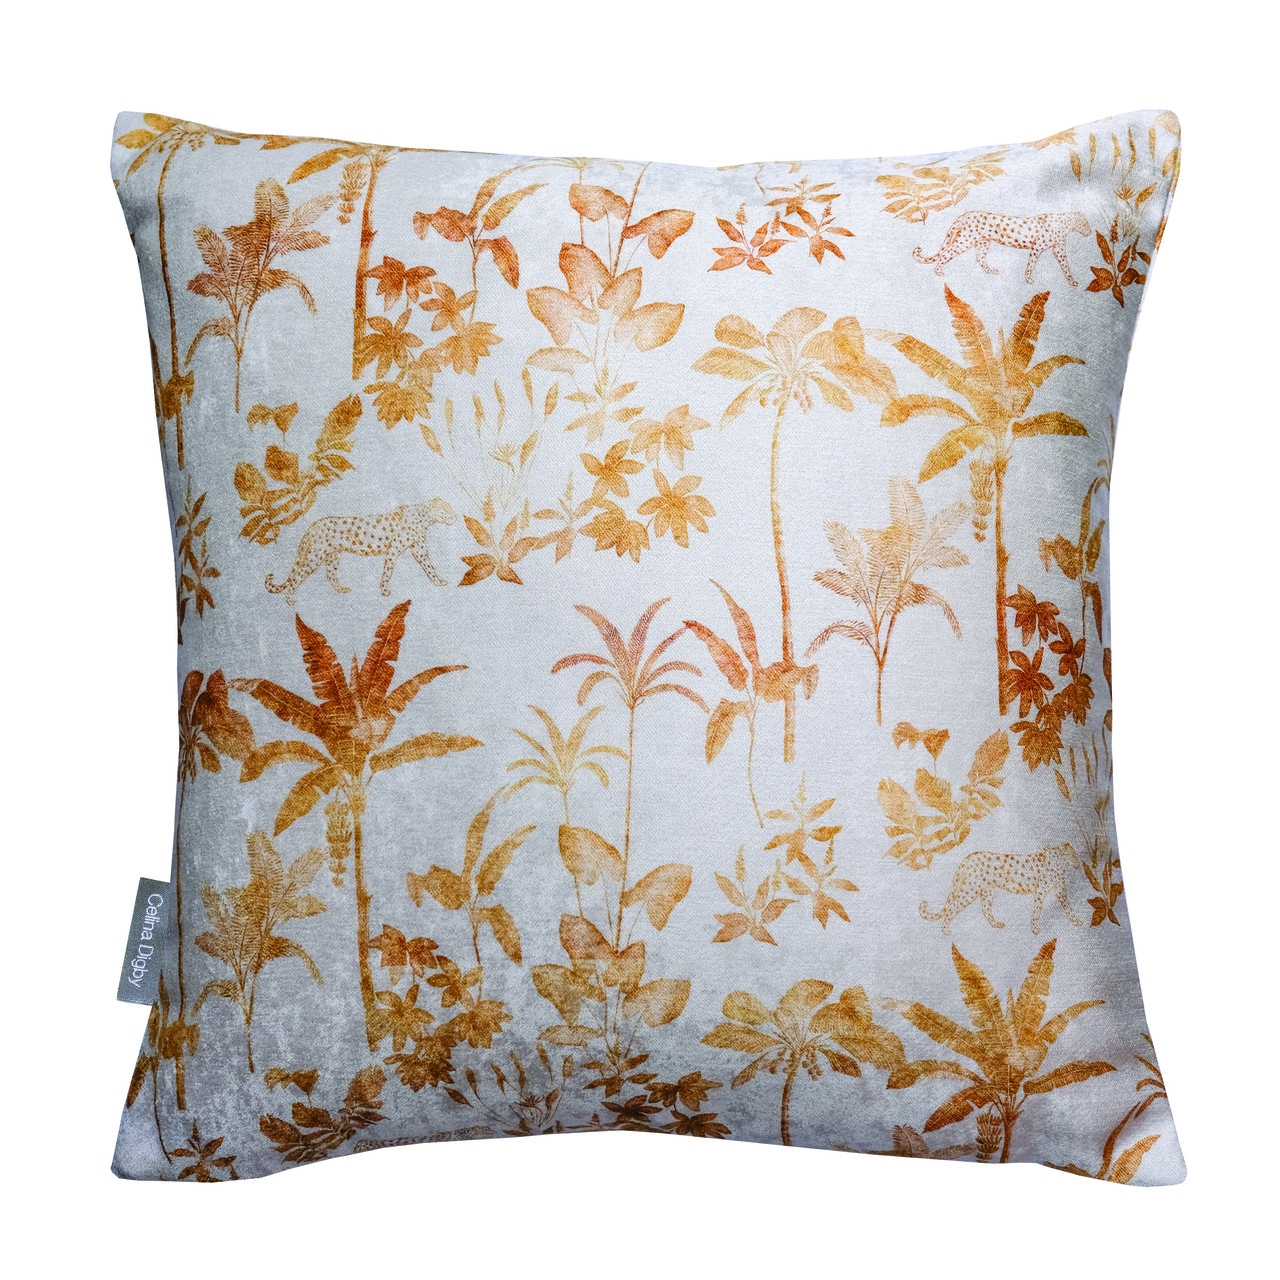 Celina Digby Luxury Opulent Velvet Cushion – Rain Forest Ivory (Available in 2 Sizes) Extra Large (55x55cm) Feather Filling